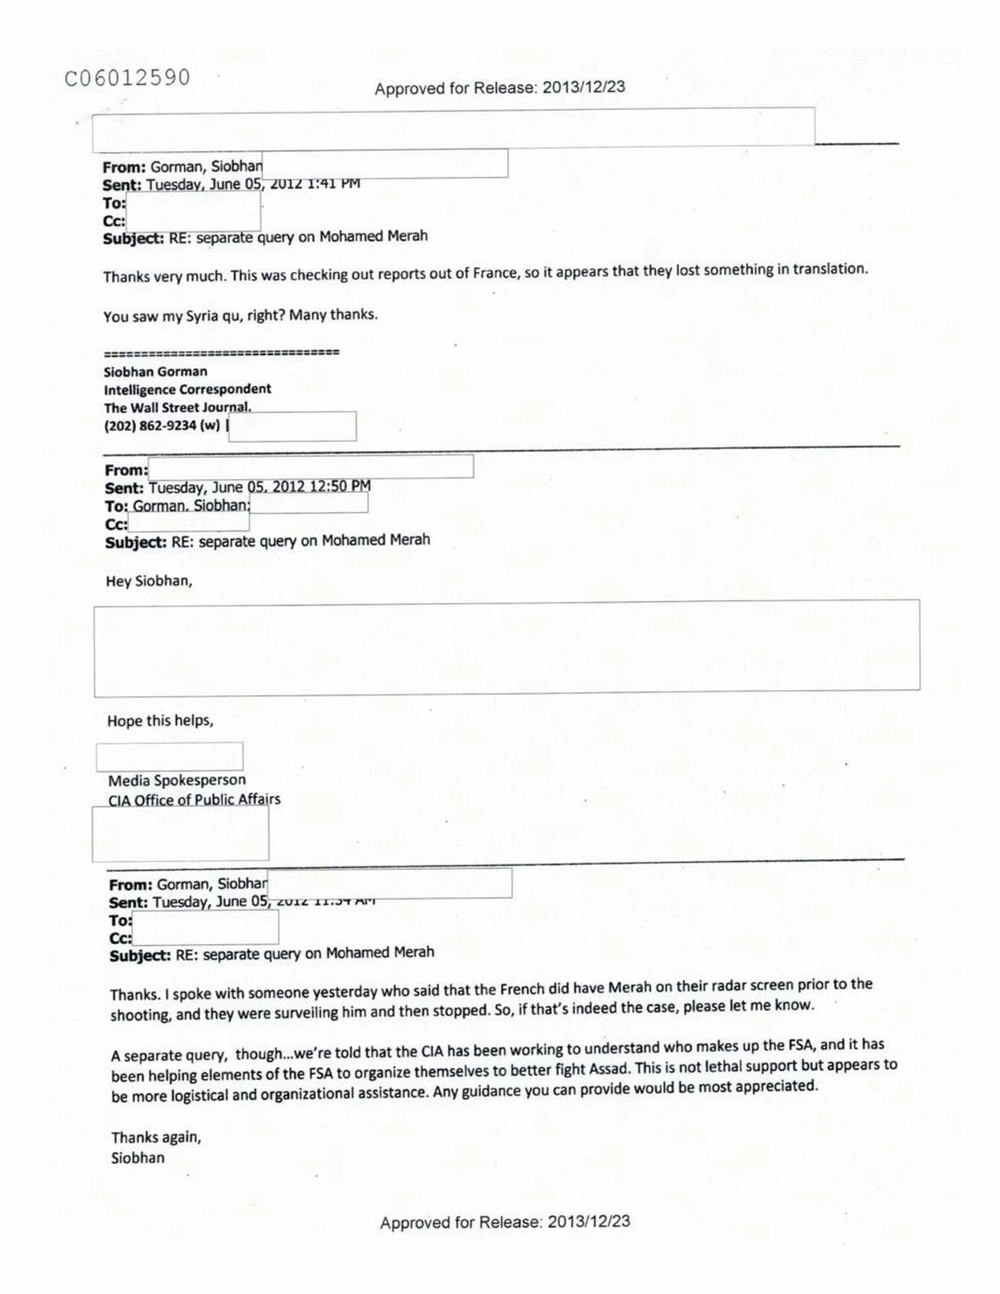 Page 144 from Email Correspondence Between Reporters and CIA Flacks